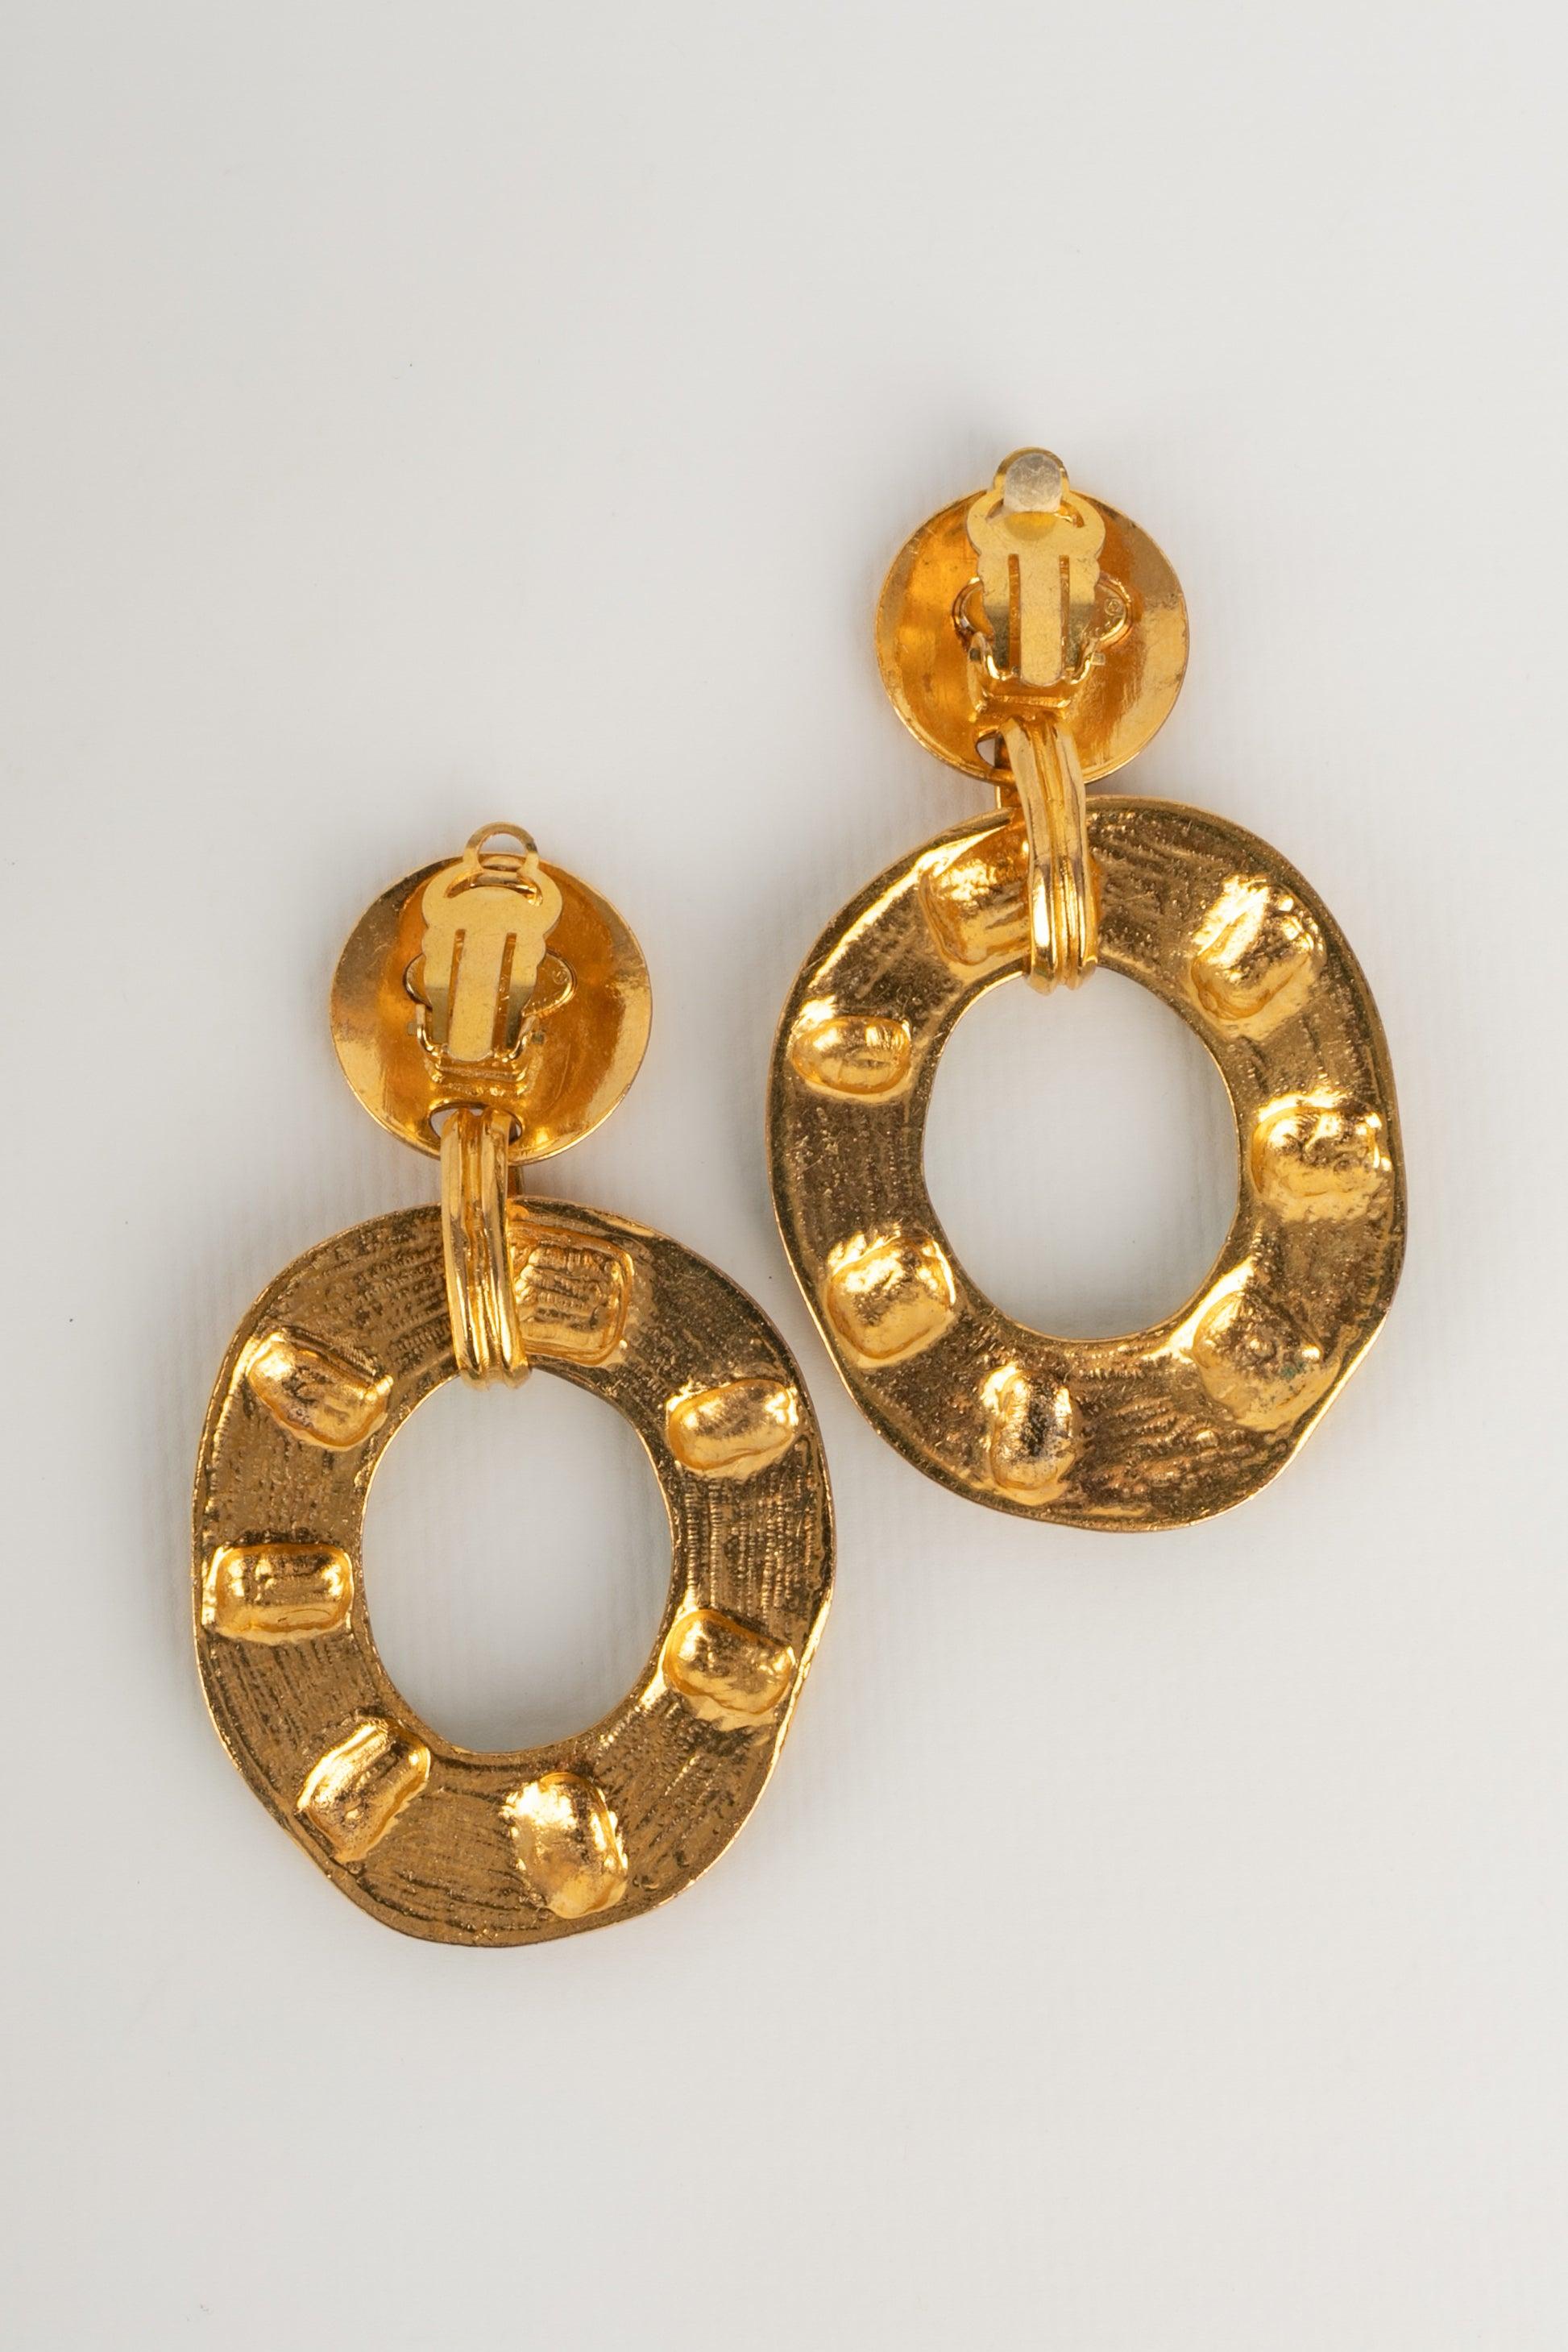 Chanel - (Made in France) Golden metal earrings with blue glass paste. Spring-Summer 1993 Collection.

Additional information:
Condition: Very good condition
Dimensions: Height: 8 cm

Seller reference: BOB165